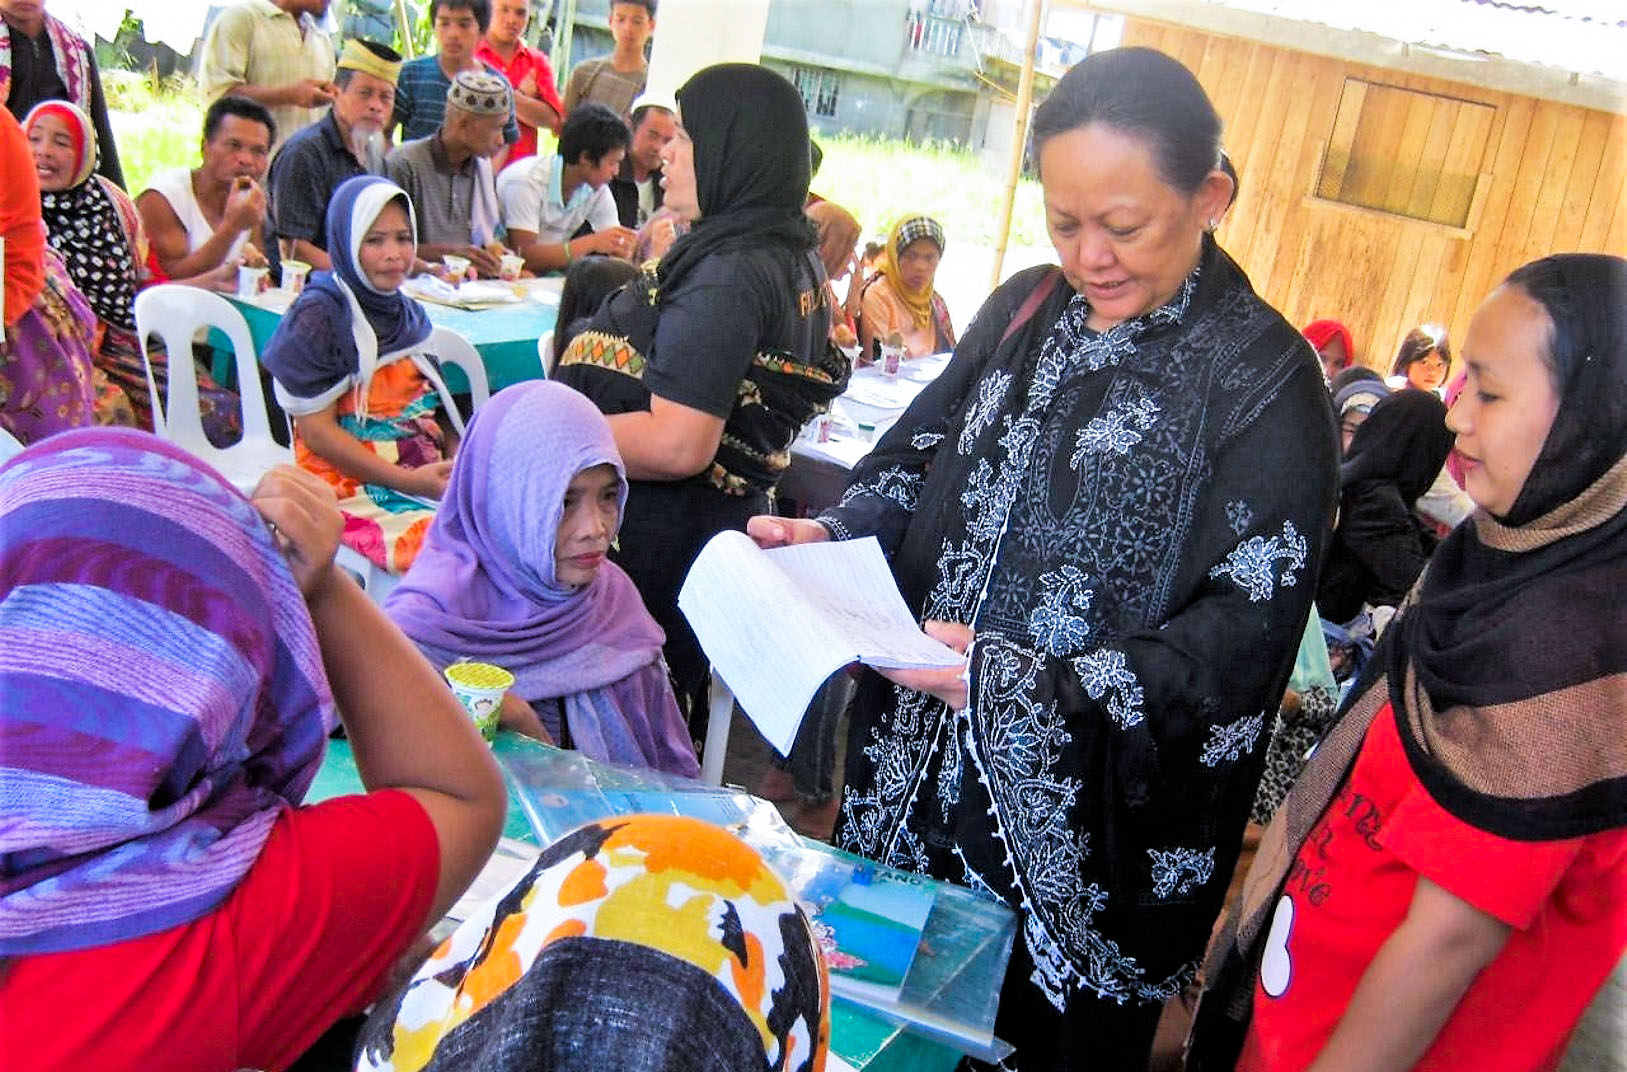 Ms. Amina Rasul, second from right, is at the Monitoring Literacy for Peace and Development event in Cotabato City, Maguindanao, Philippines in 2014. Photo: Philippines Centre for Islam and Democracy